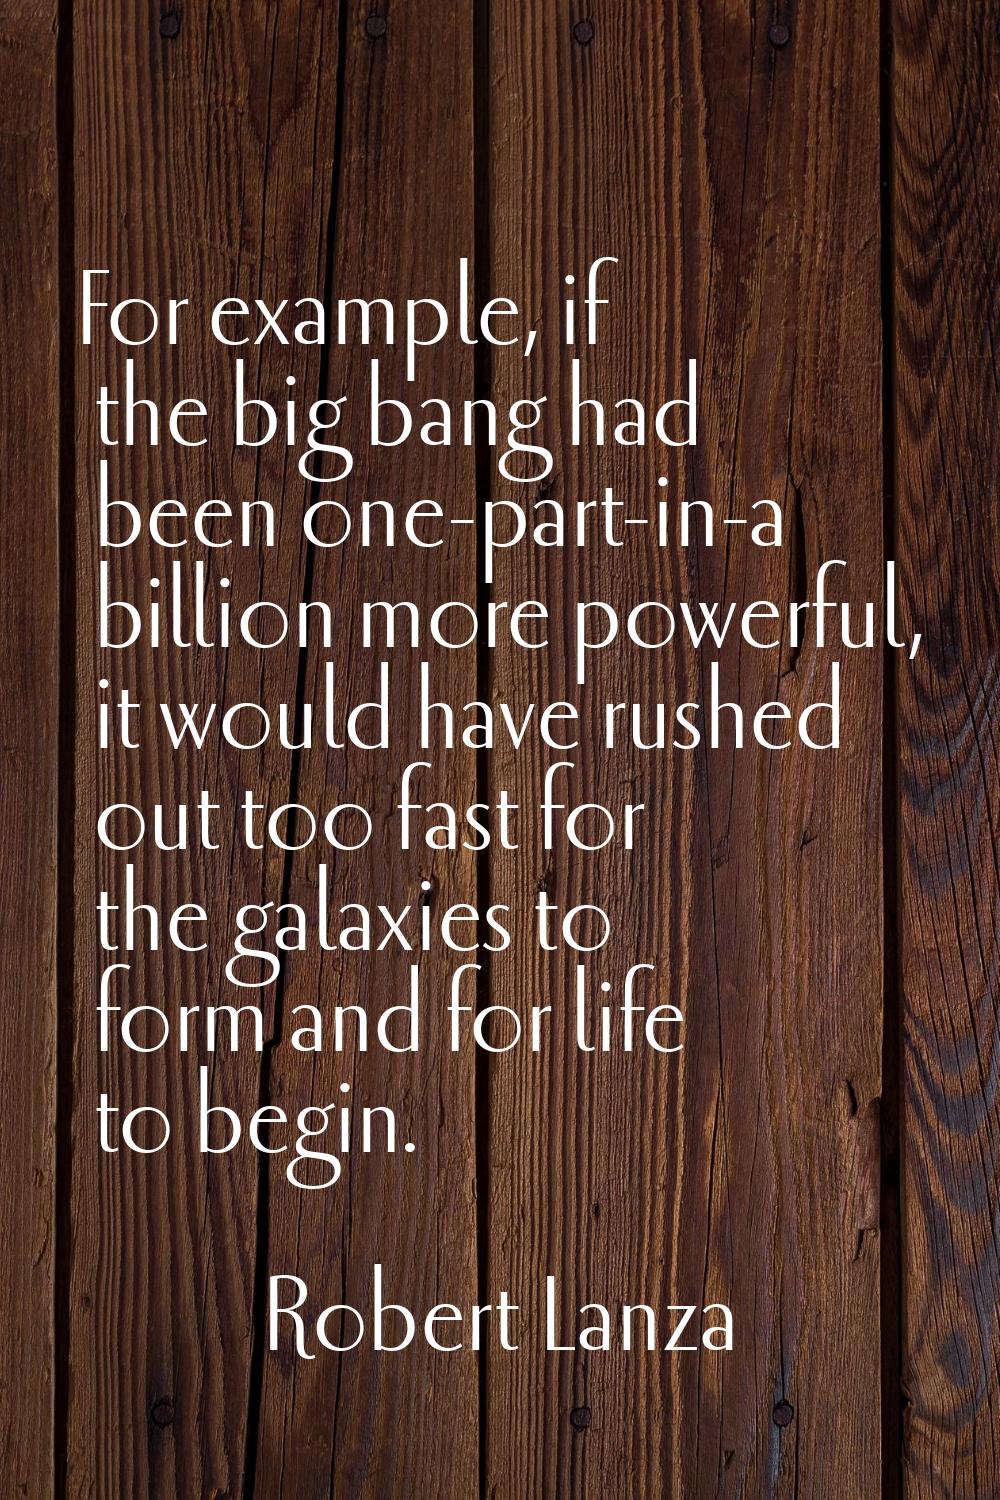 For example, if the big bang had been one-part-in-a billion more powerful, it would have rushed out